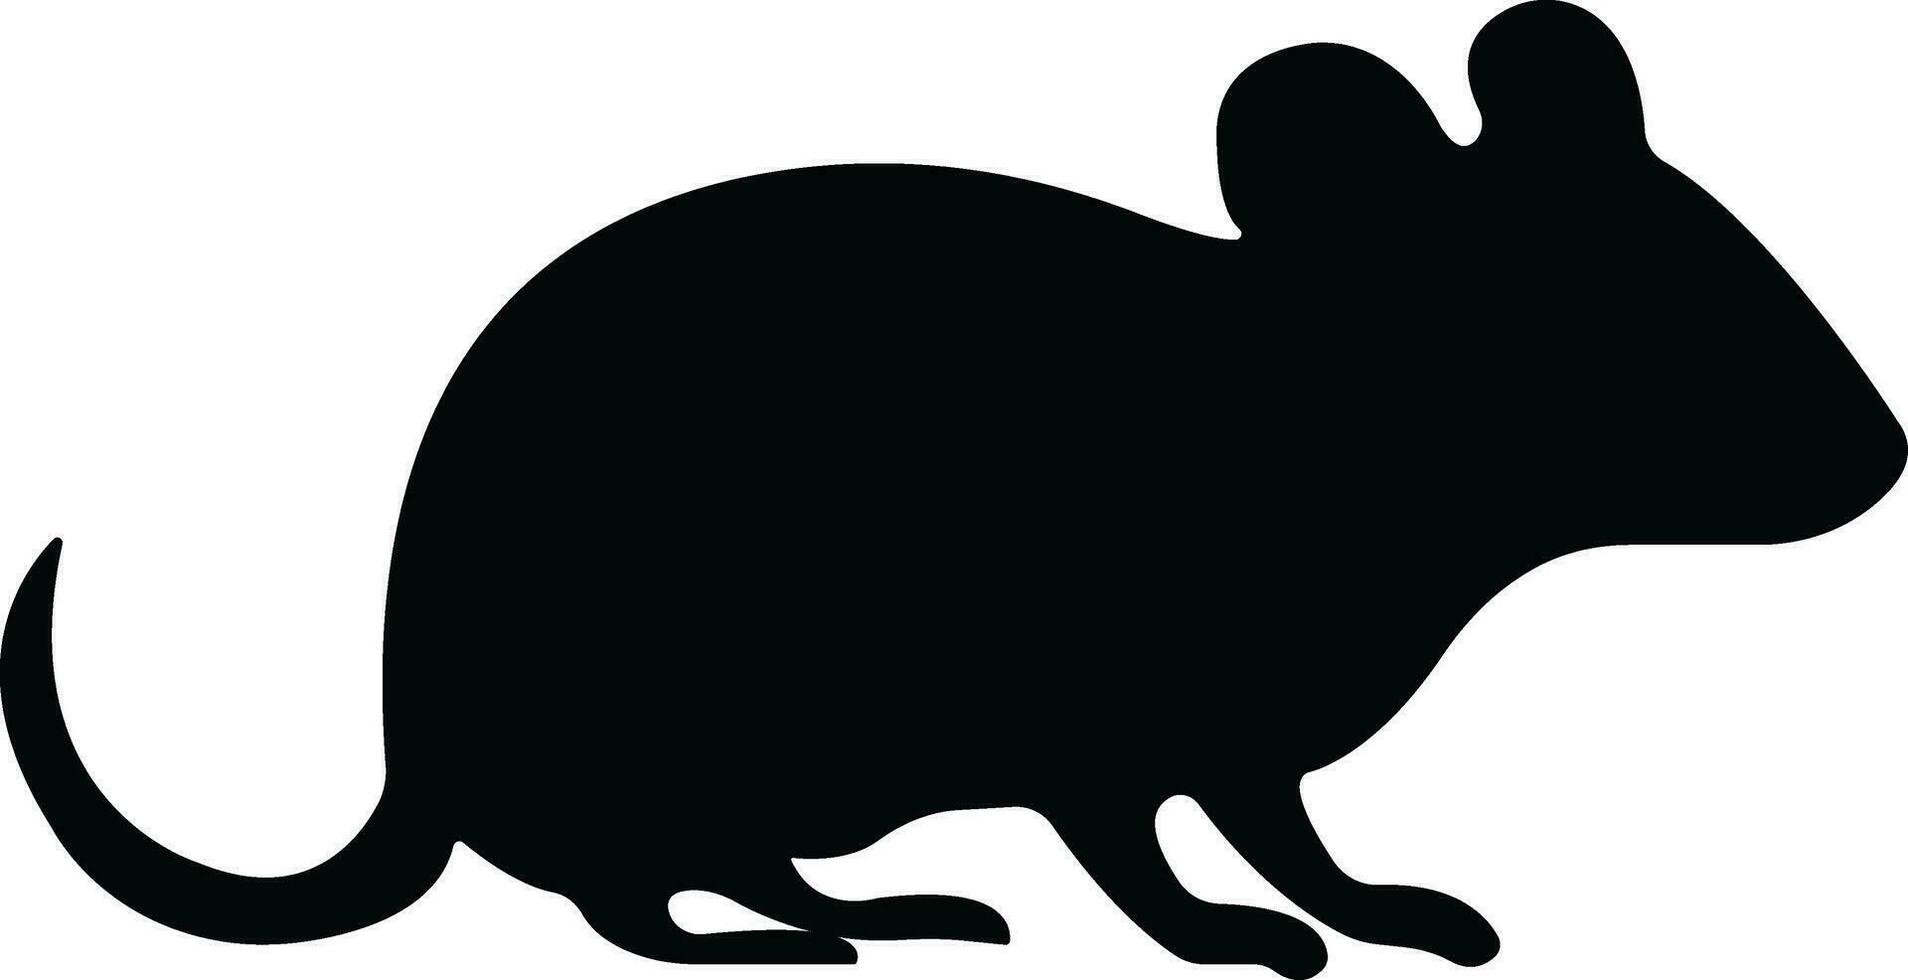 mouse animal icon in trendy flat style. isolated on transparent background. rat, mice sign symbols design use vector for apps and website